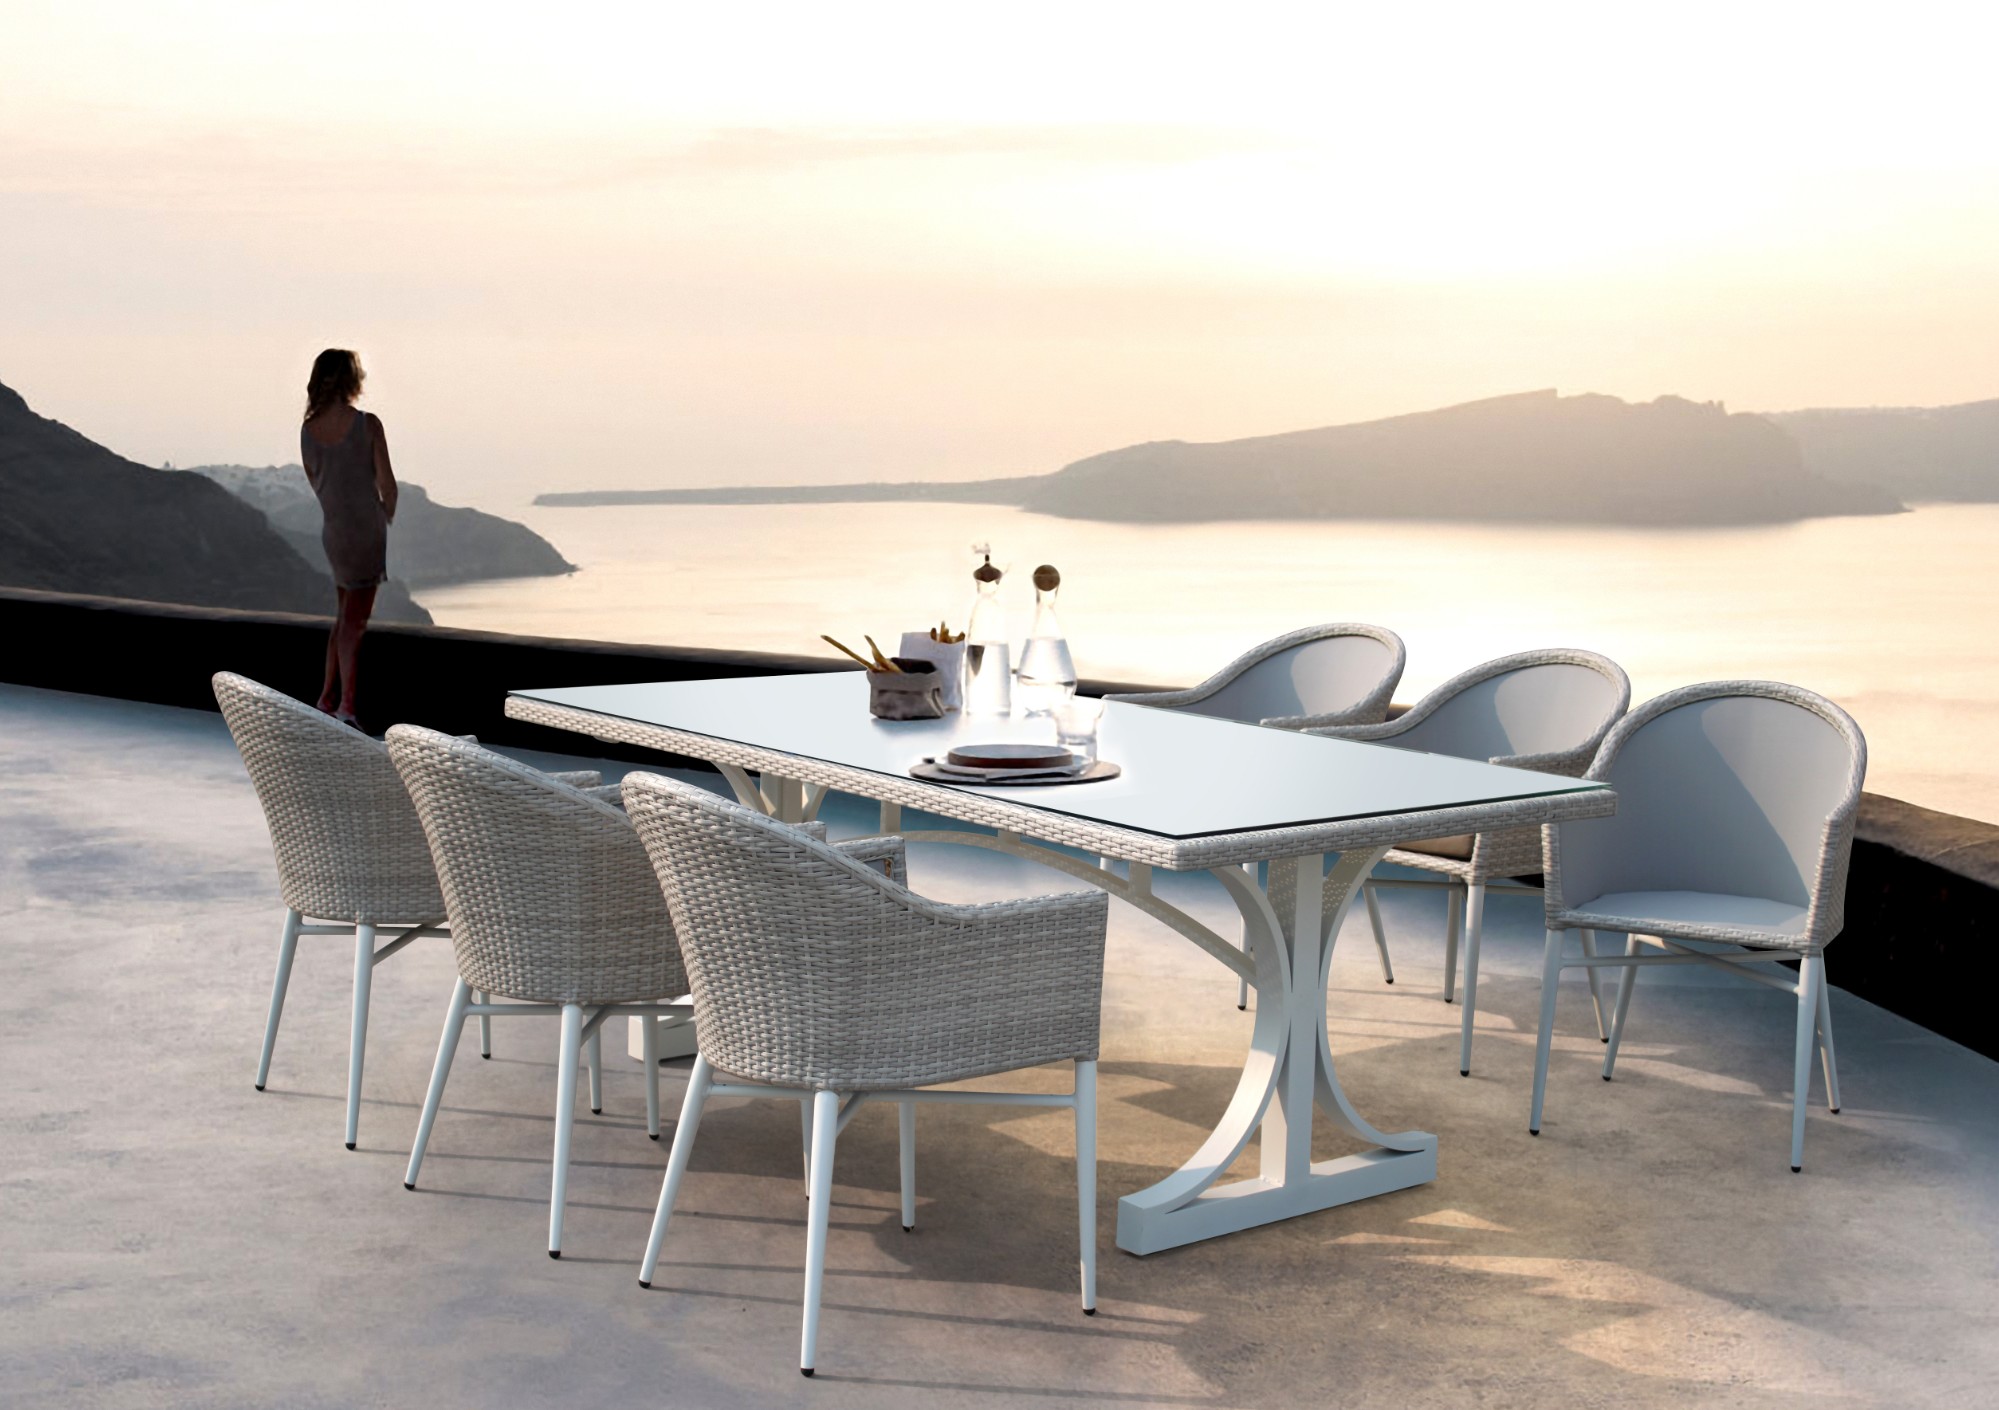 Outdoor Dining Table Set Supplier Manufacturers, Outdoor Dining Table Set Supplier Factory, Supply Outdoor Dining Table Set Supplier